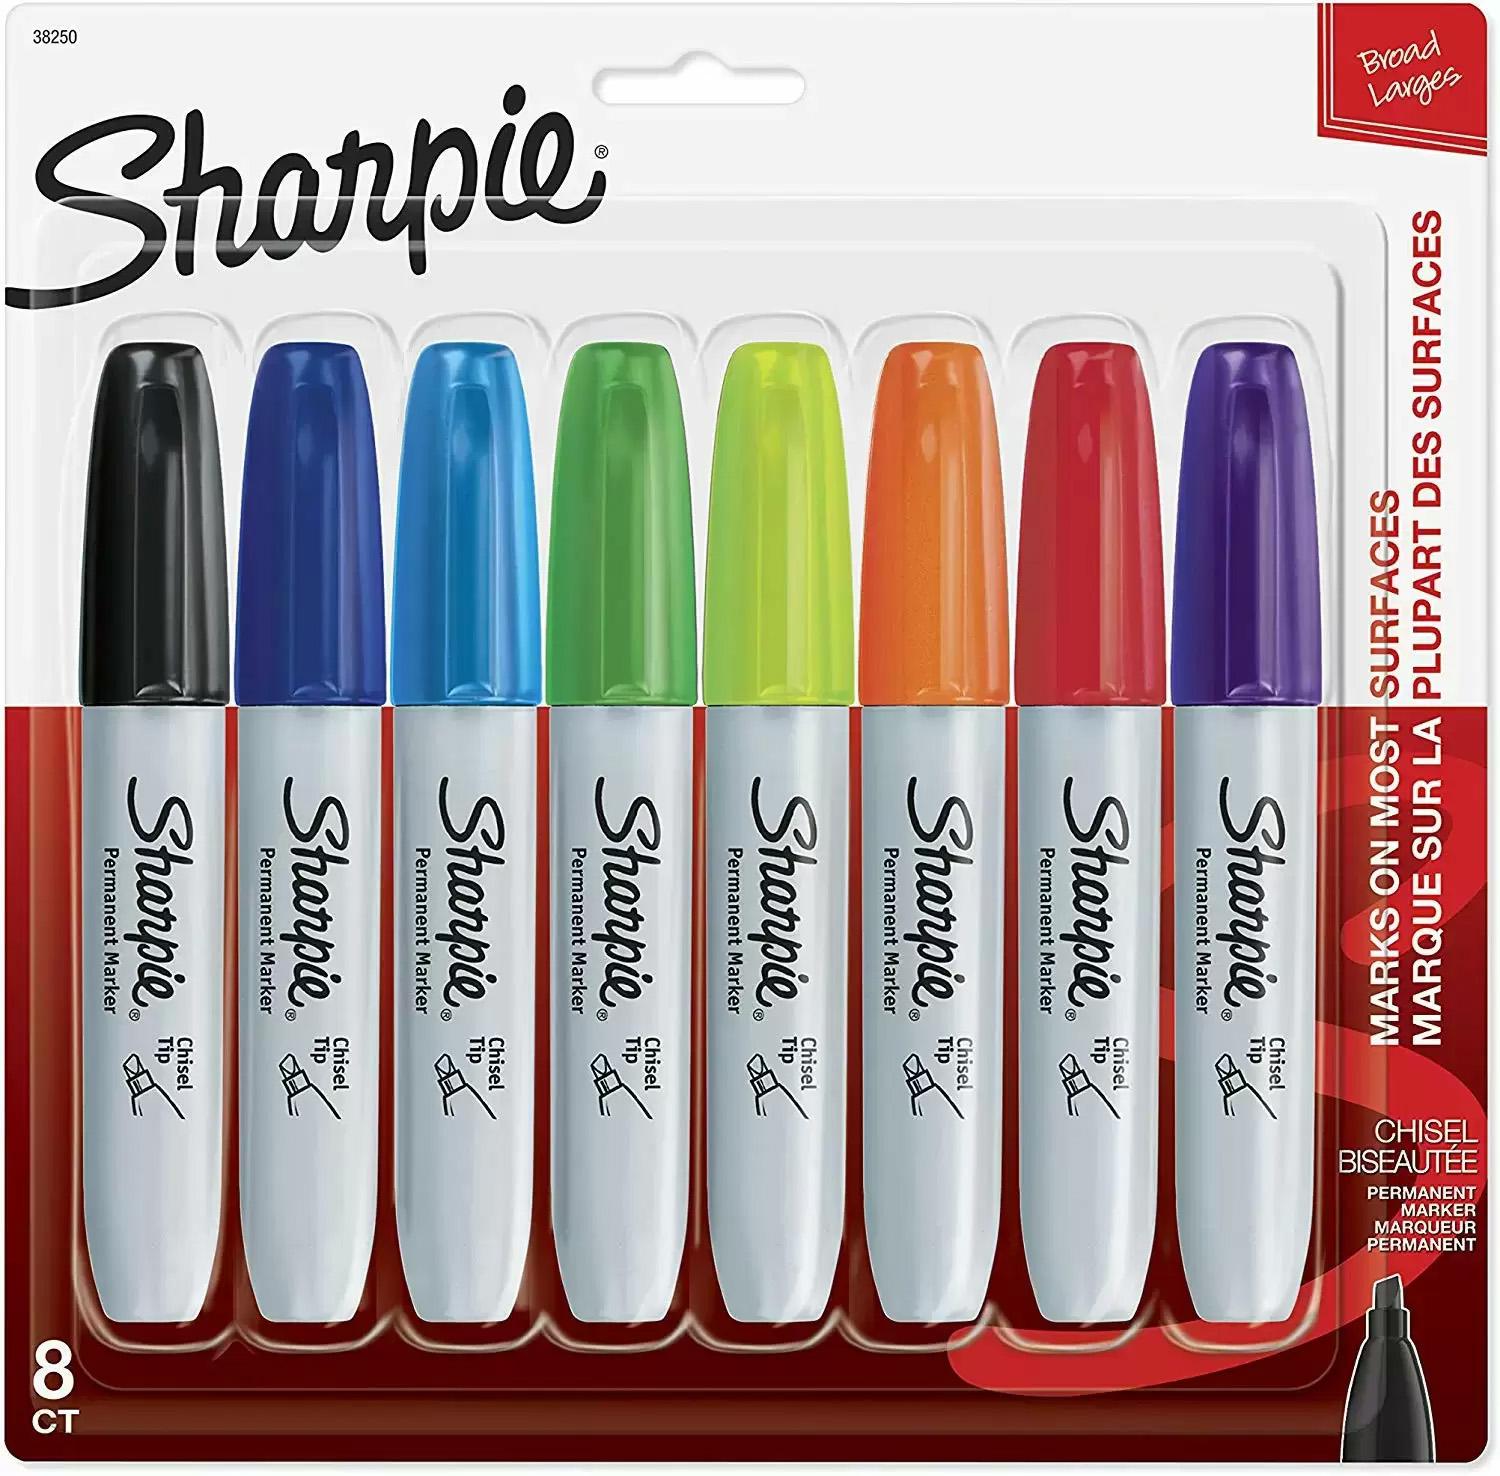 Amazon Office Supplies Items $10 Off Coupon